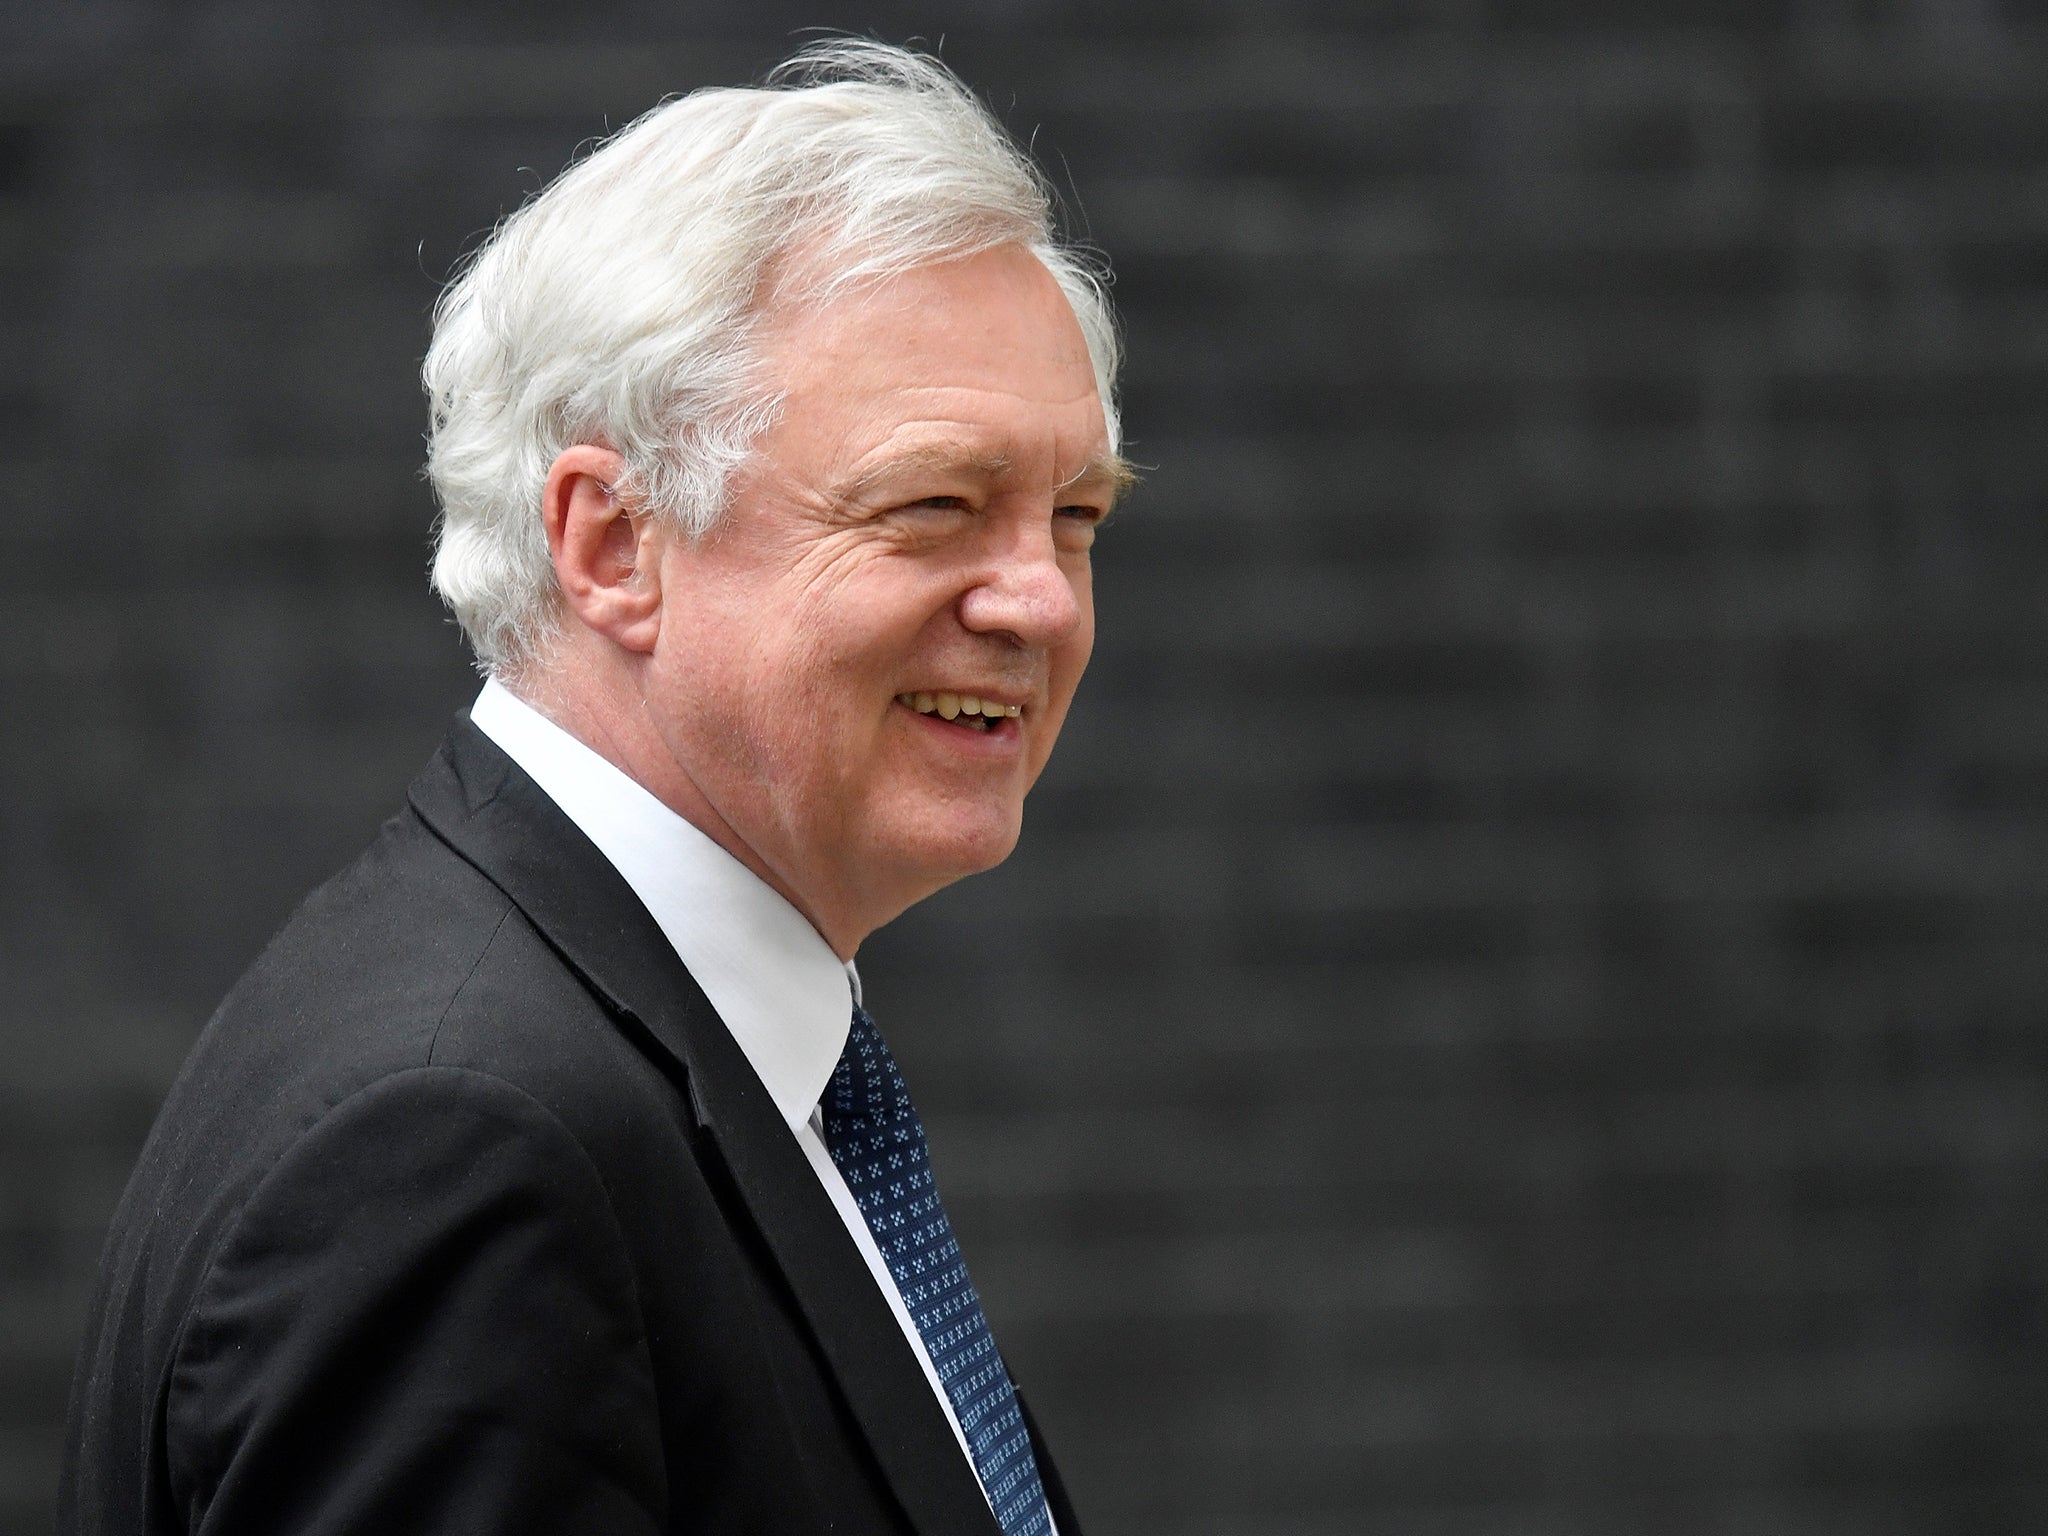 David Davis sent his letter out on Wednesday afternoon